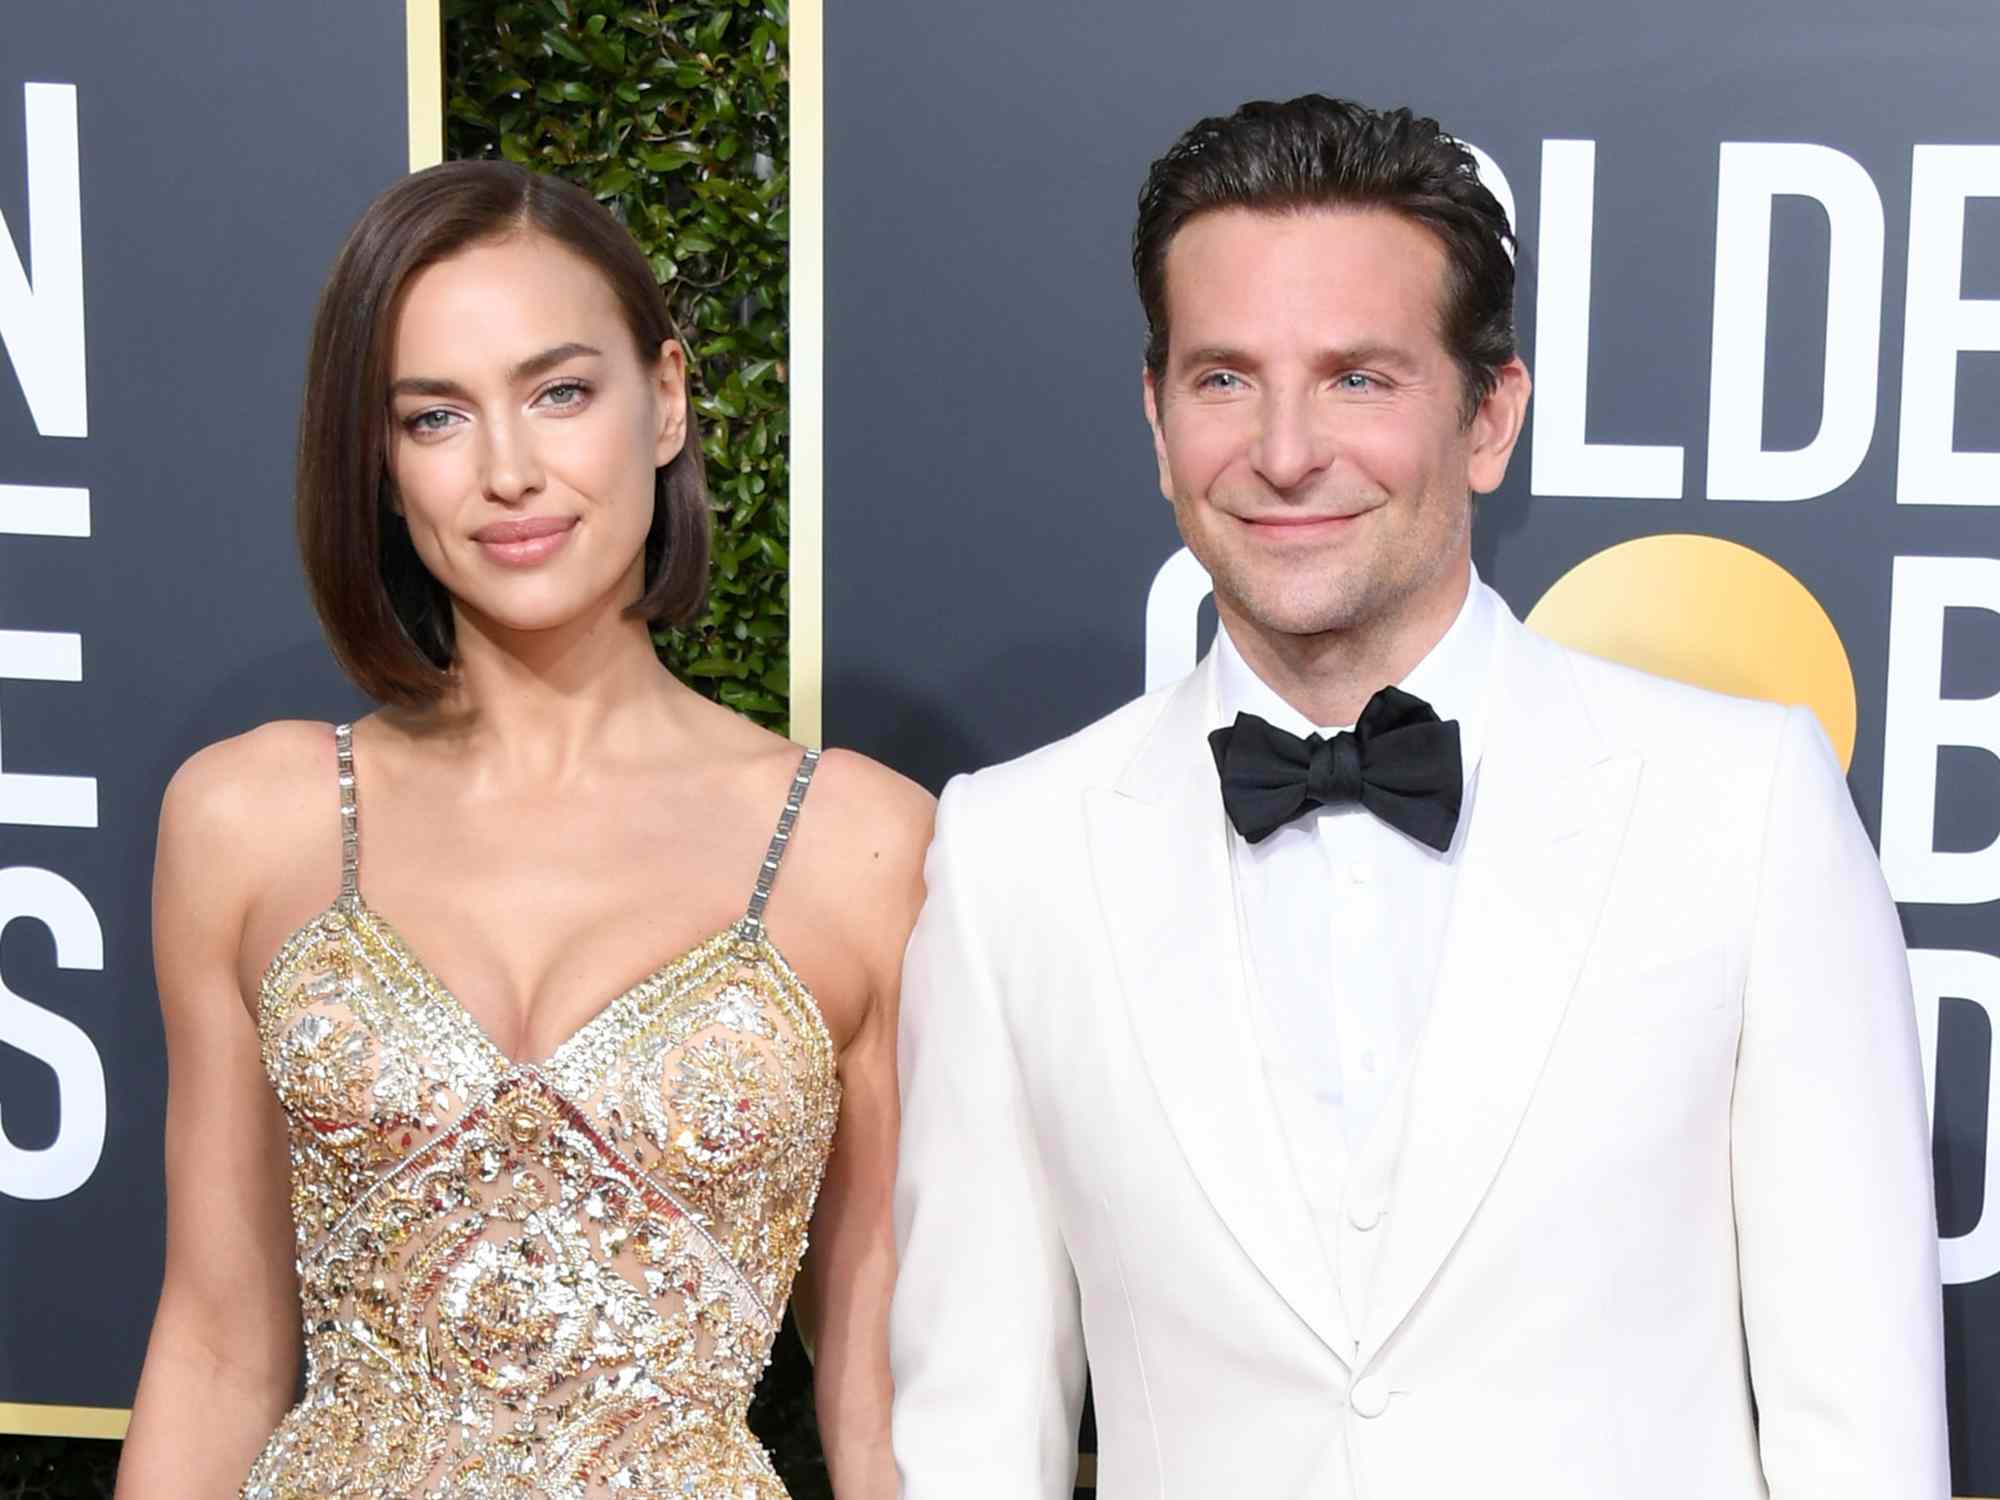 Irina Shayk and Bradley Cooper attend the 76th Annual Golden Globe Awards at The Beverly Hilton Hotel on January 6, 2019 in Beverly Hills, California